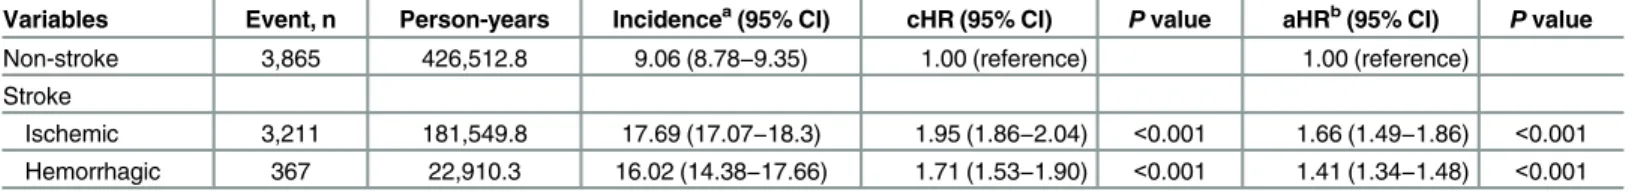 Table 4. Incidence rates and hazard ratios of chronic kidney disease in patients with different types of stroke.